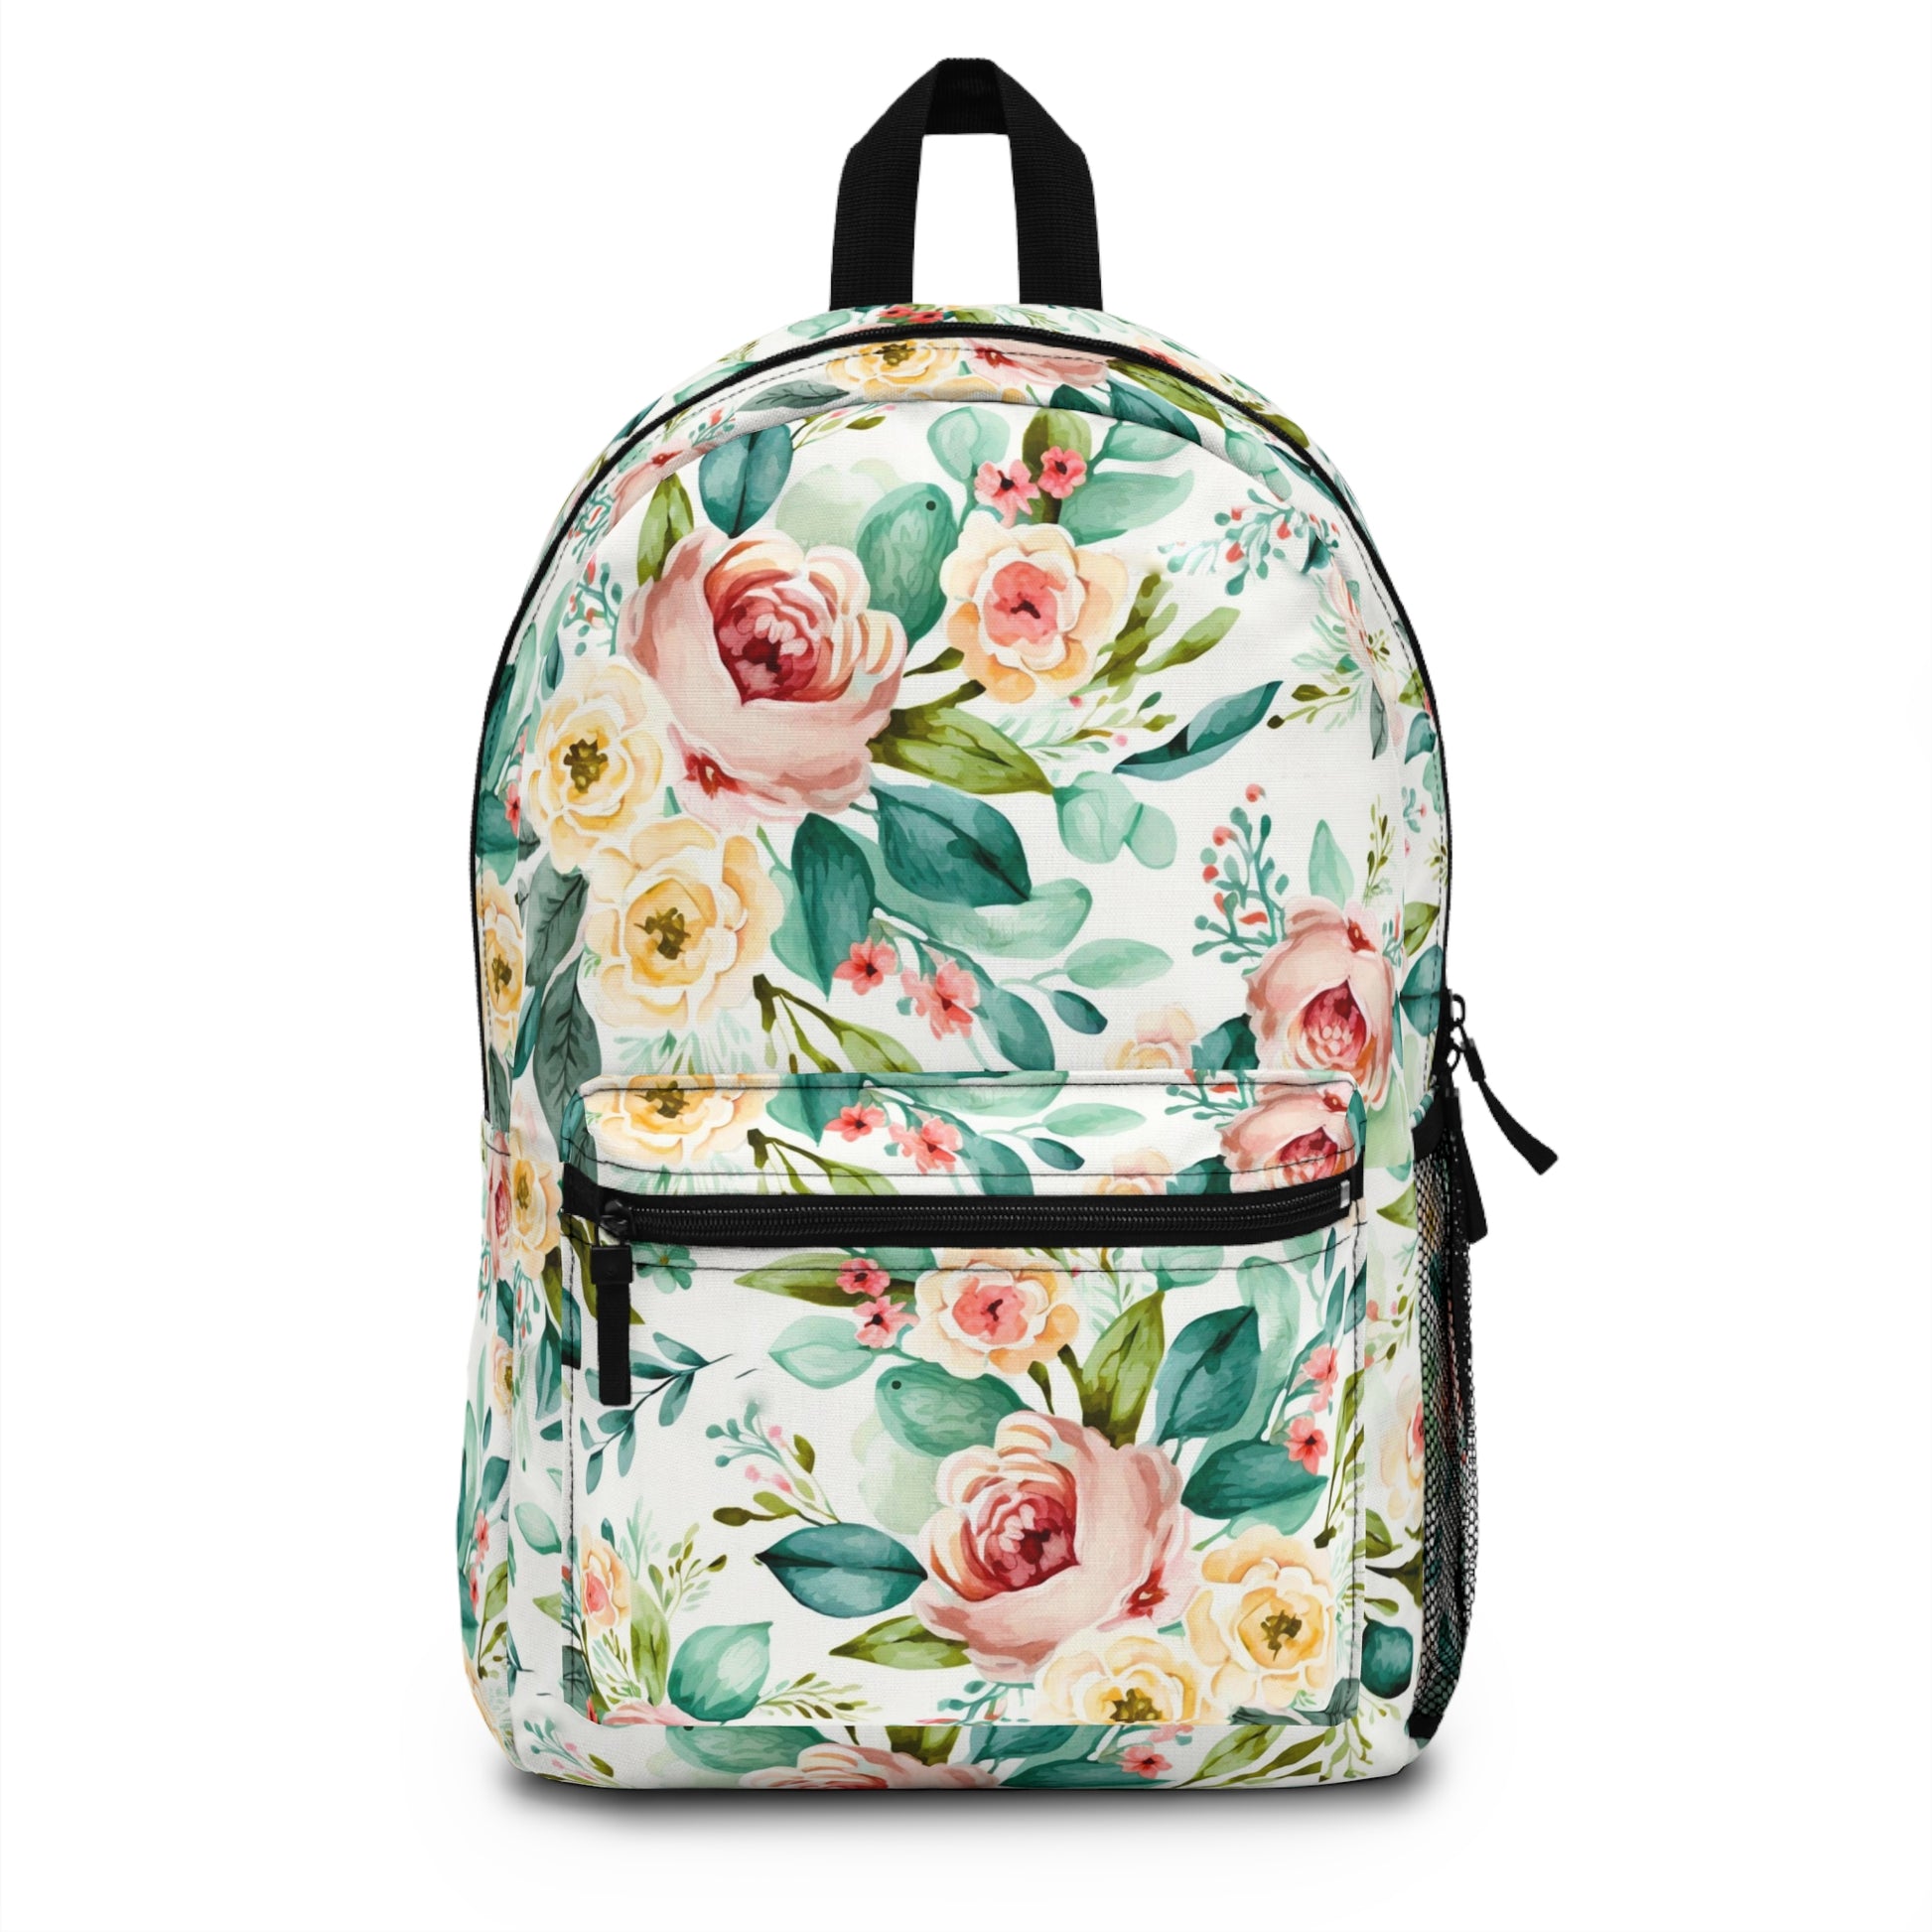 girls floral backpack with pink, orange and green floral print for back to school or carry on bag